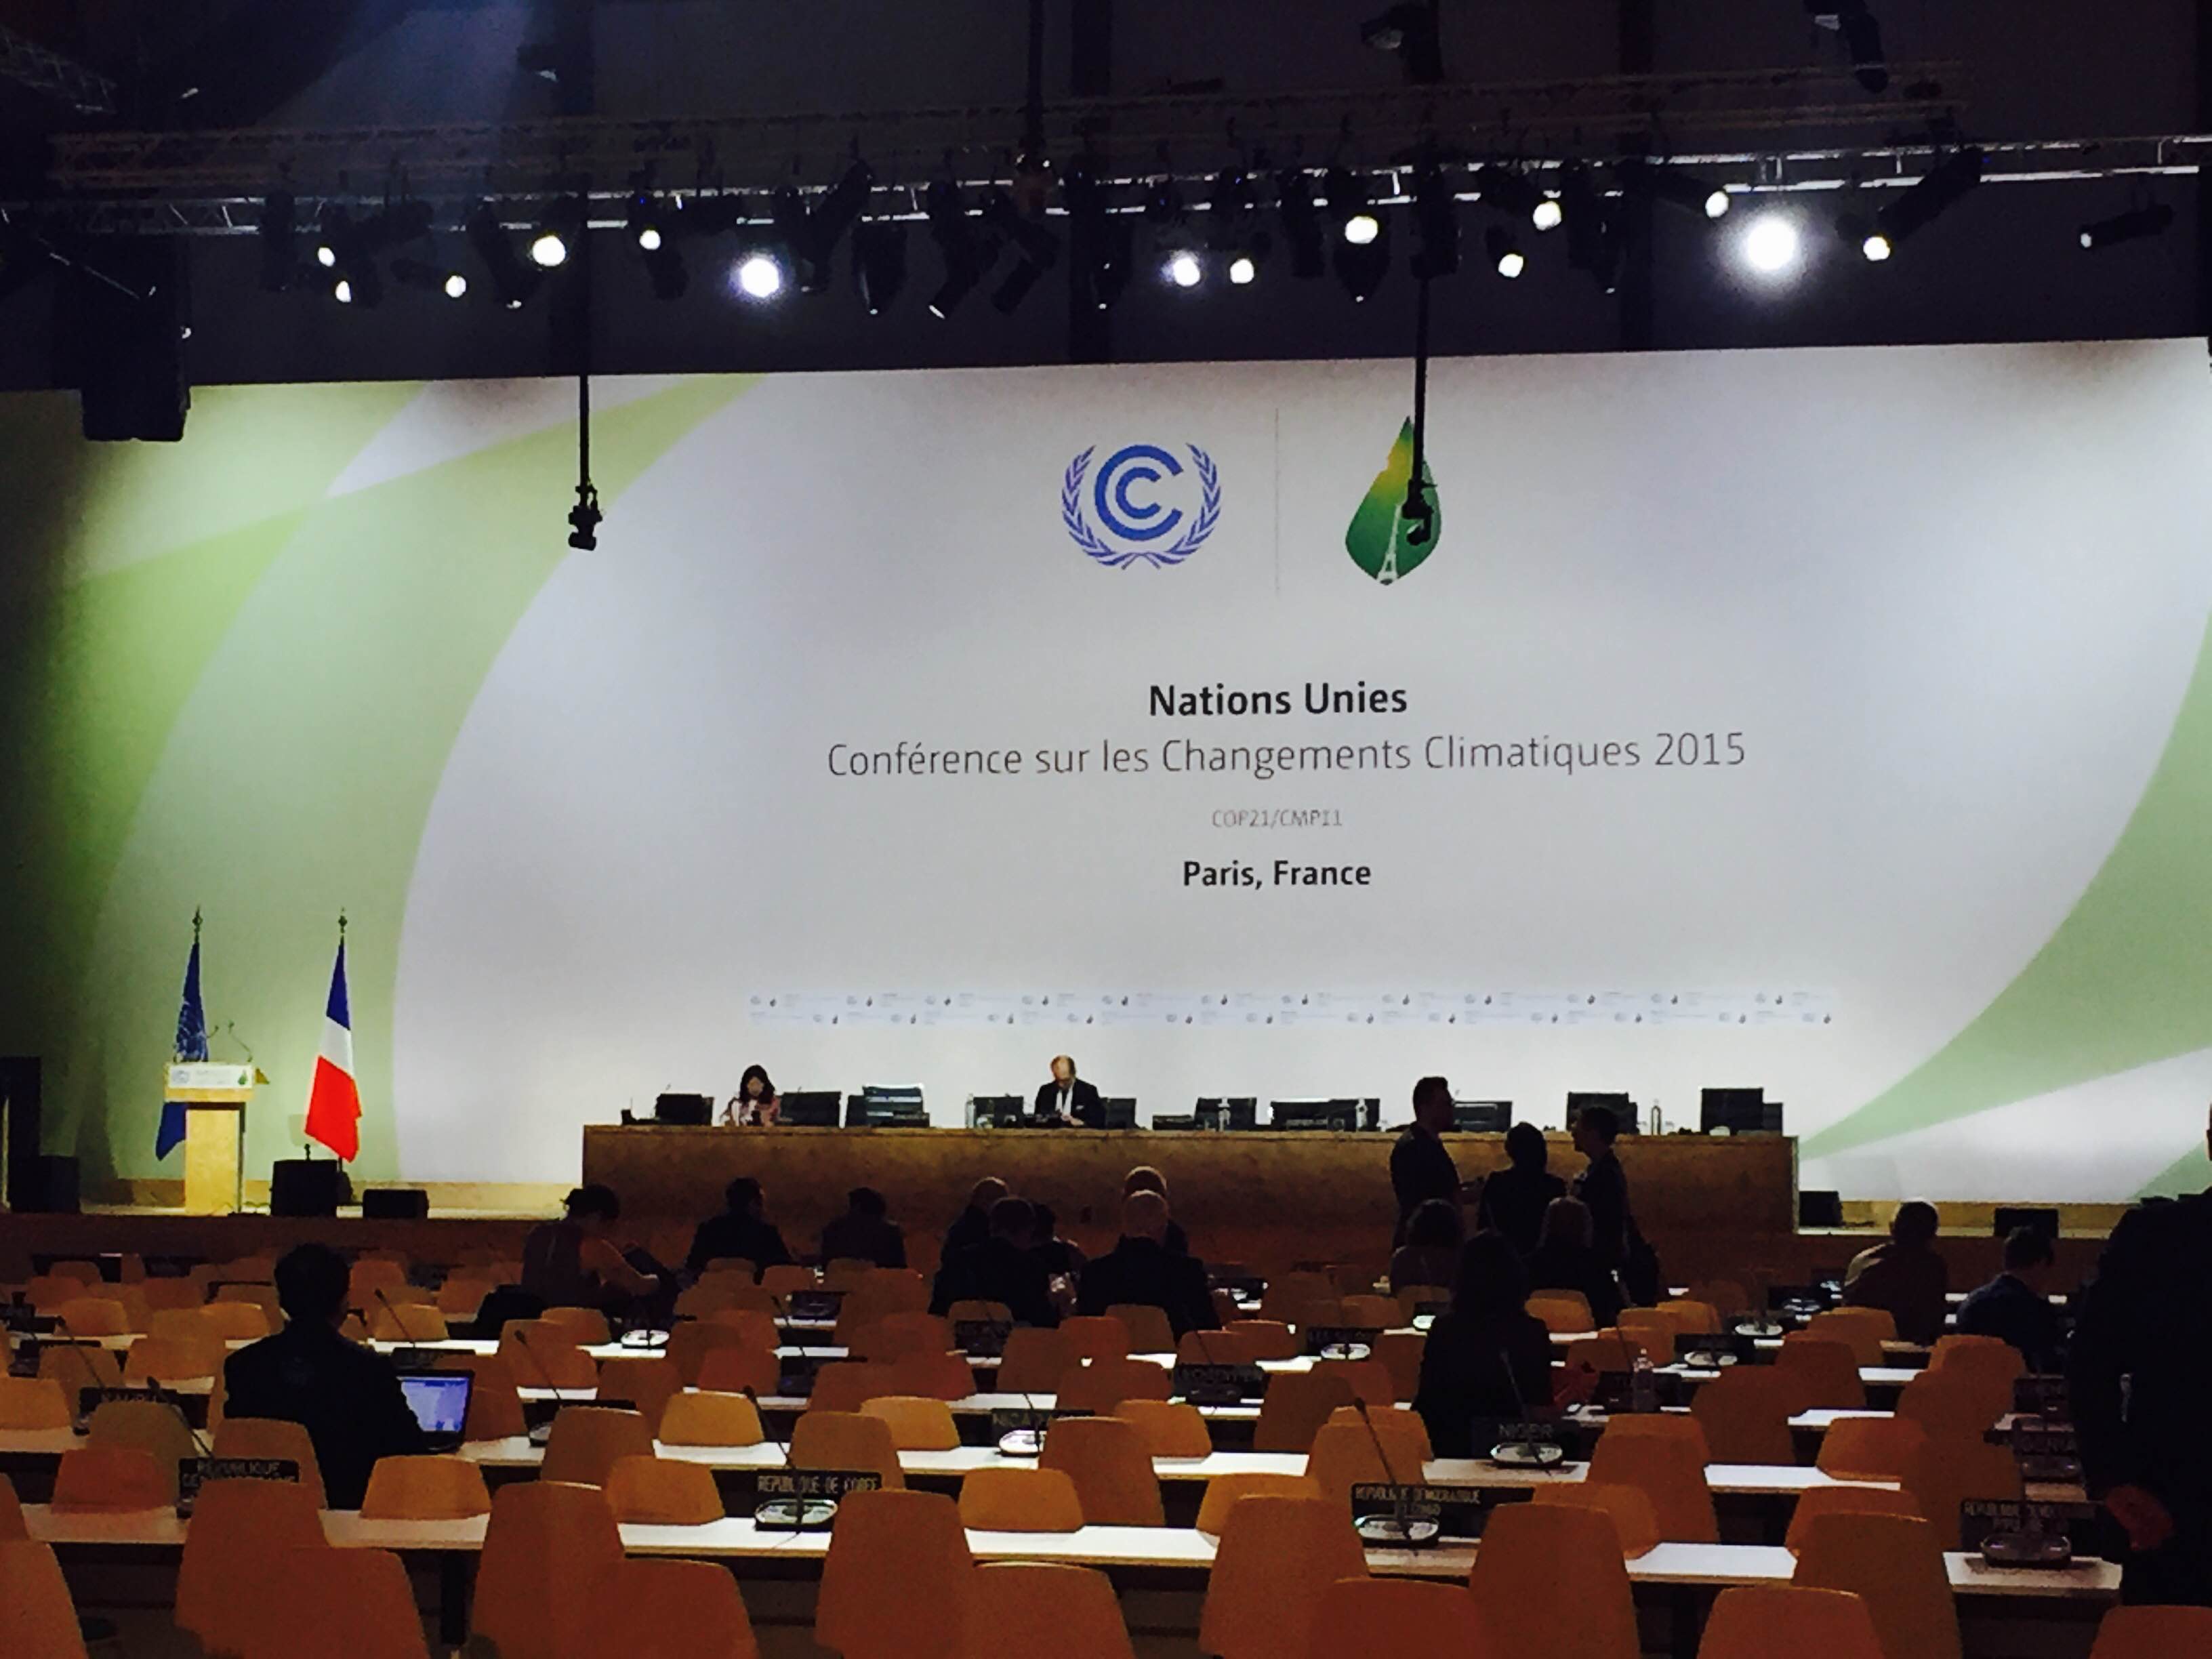 More ‘hot air’ from Heads of States as Climate Summit opens